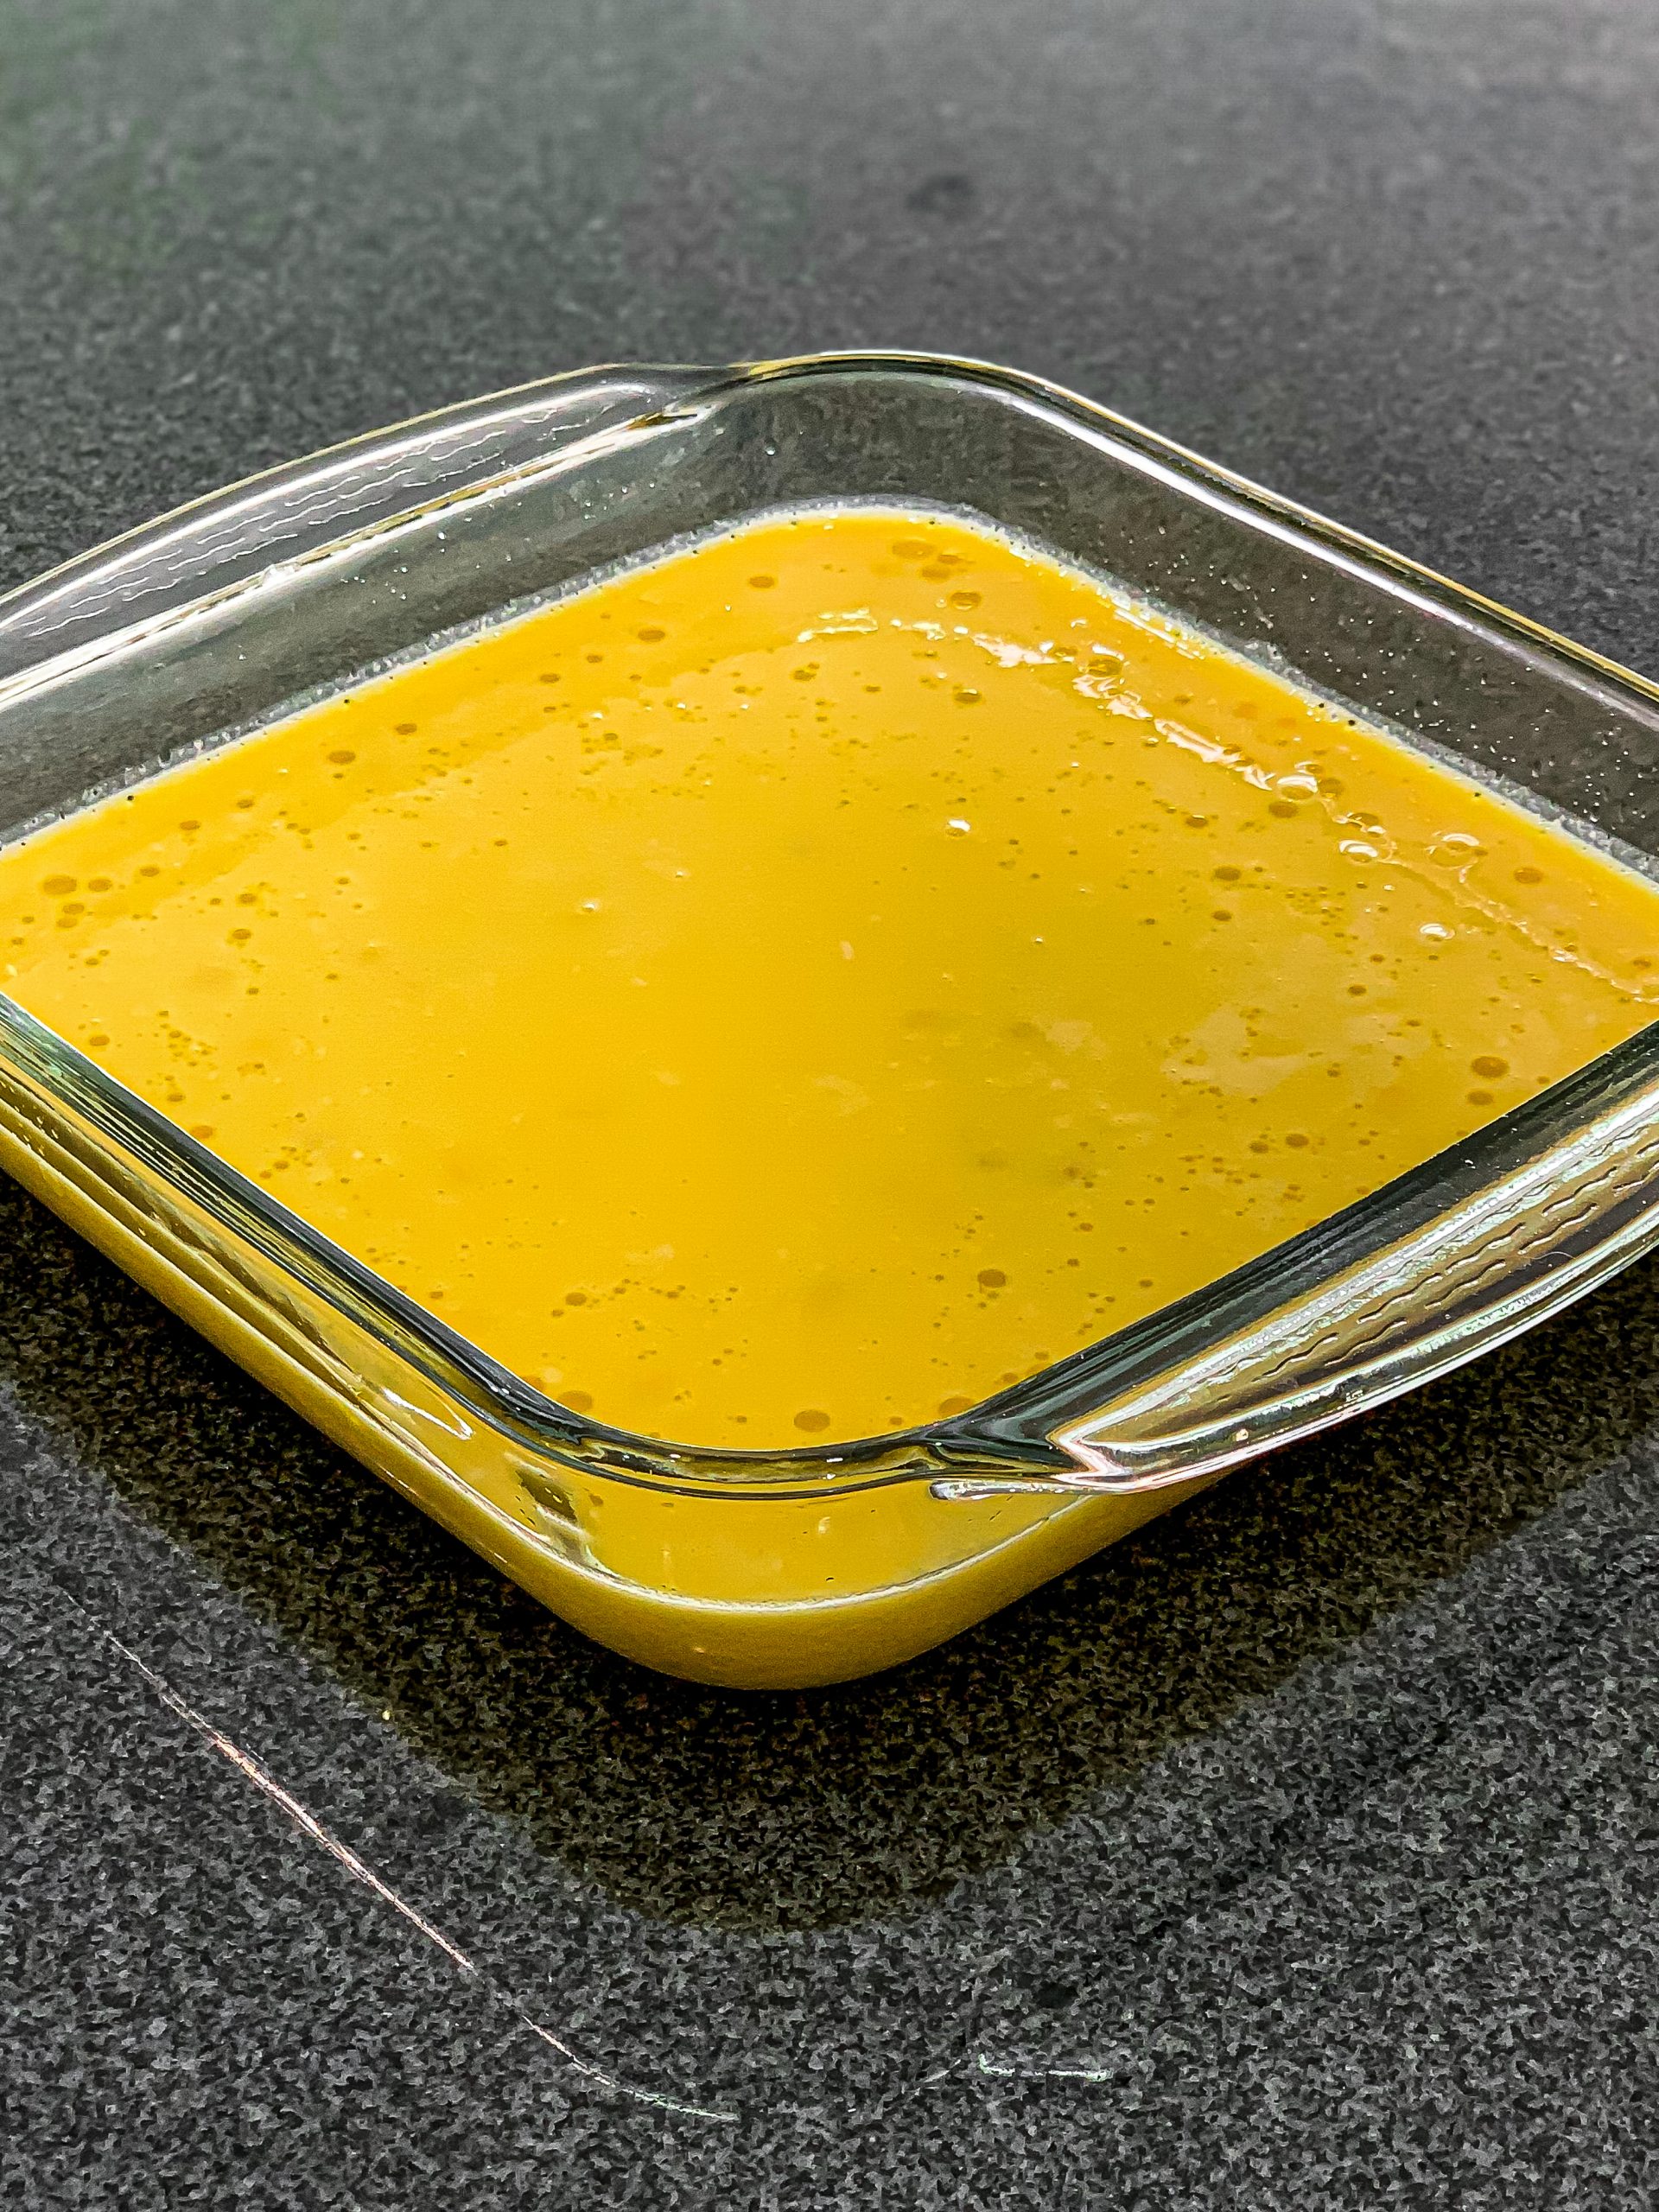 In the prepared baking dish, pour the mixture and bake for 25 minutes or until the top is puffy and golden brown.